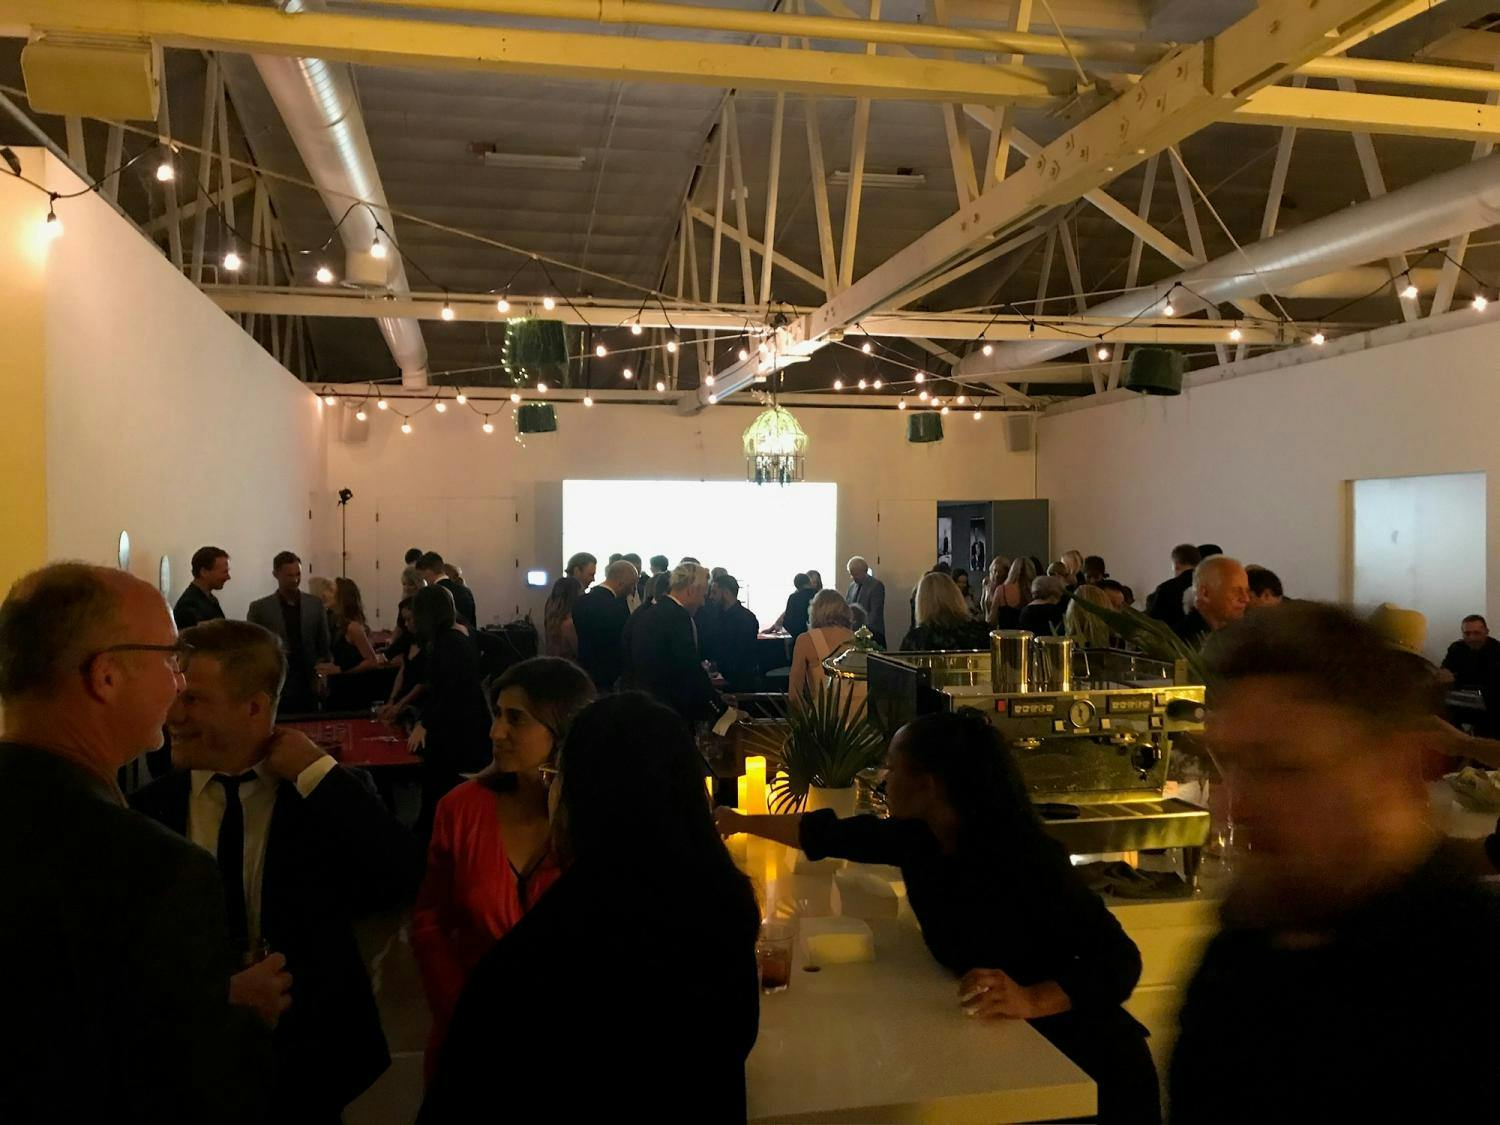 A gallery soirée with people engaged in conversation, accented by warm lighting and the gallery's structural white beams.